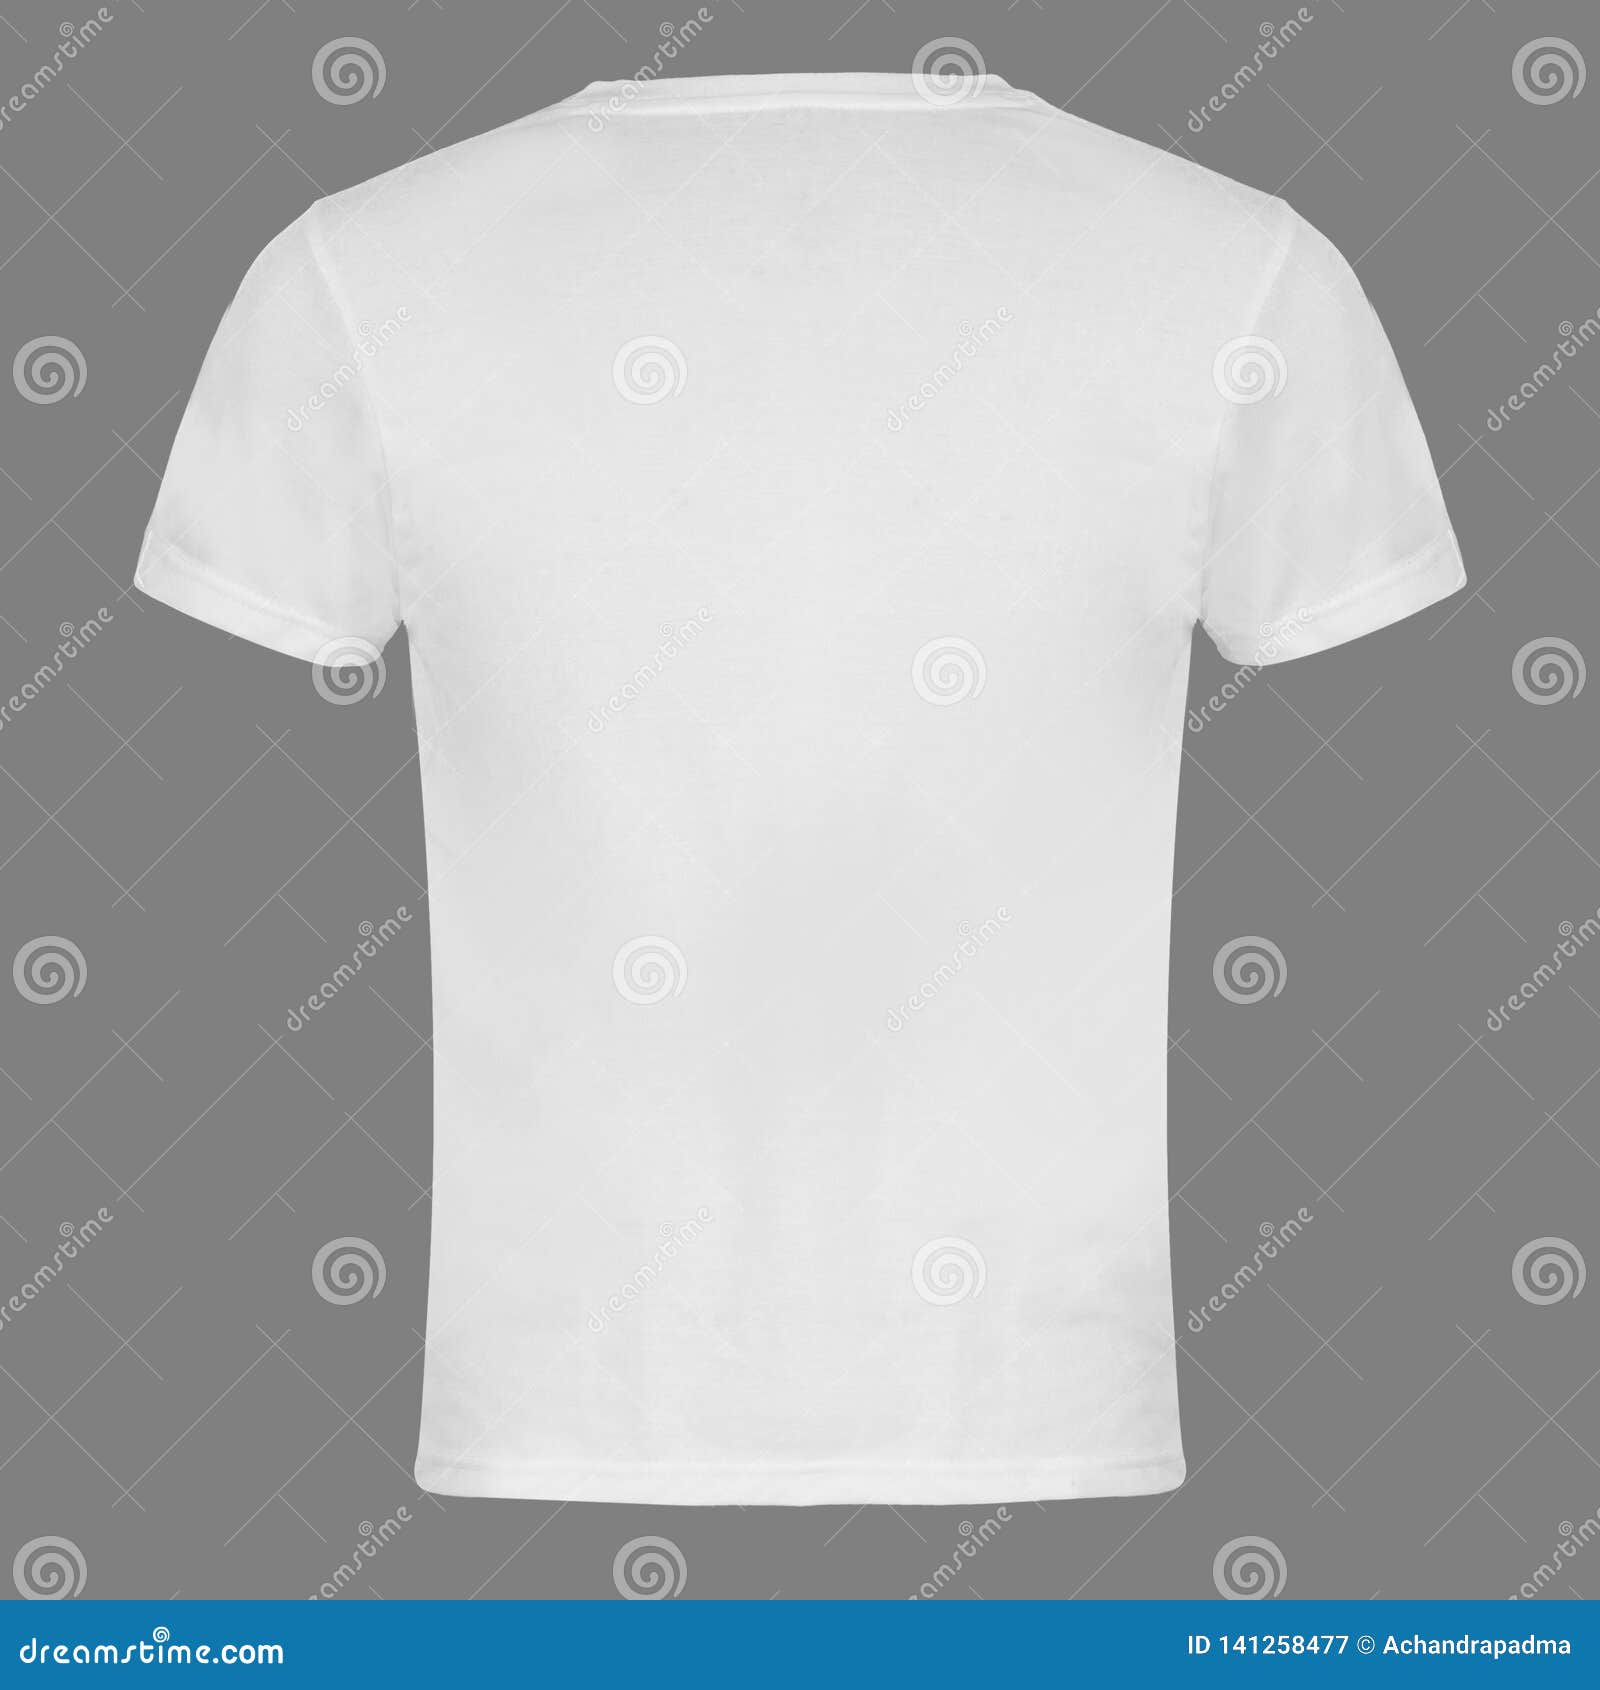 White Blank T Shirt Back Isolated In Gray Background Stock Image